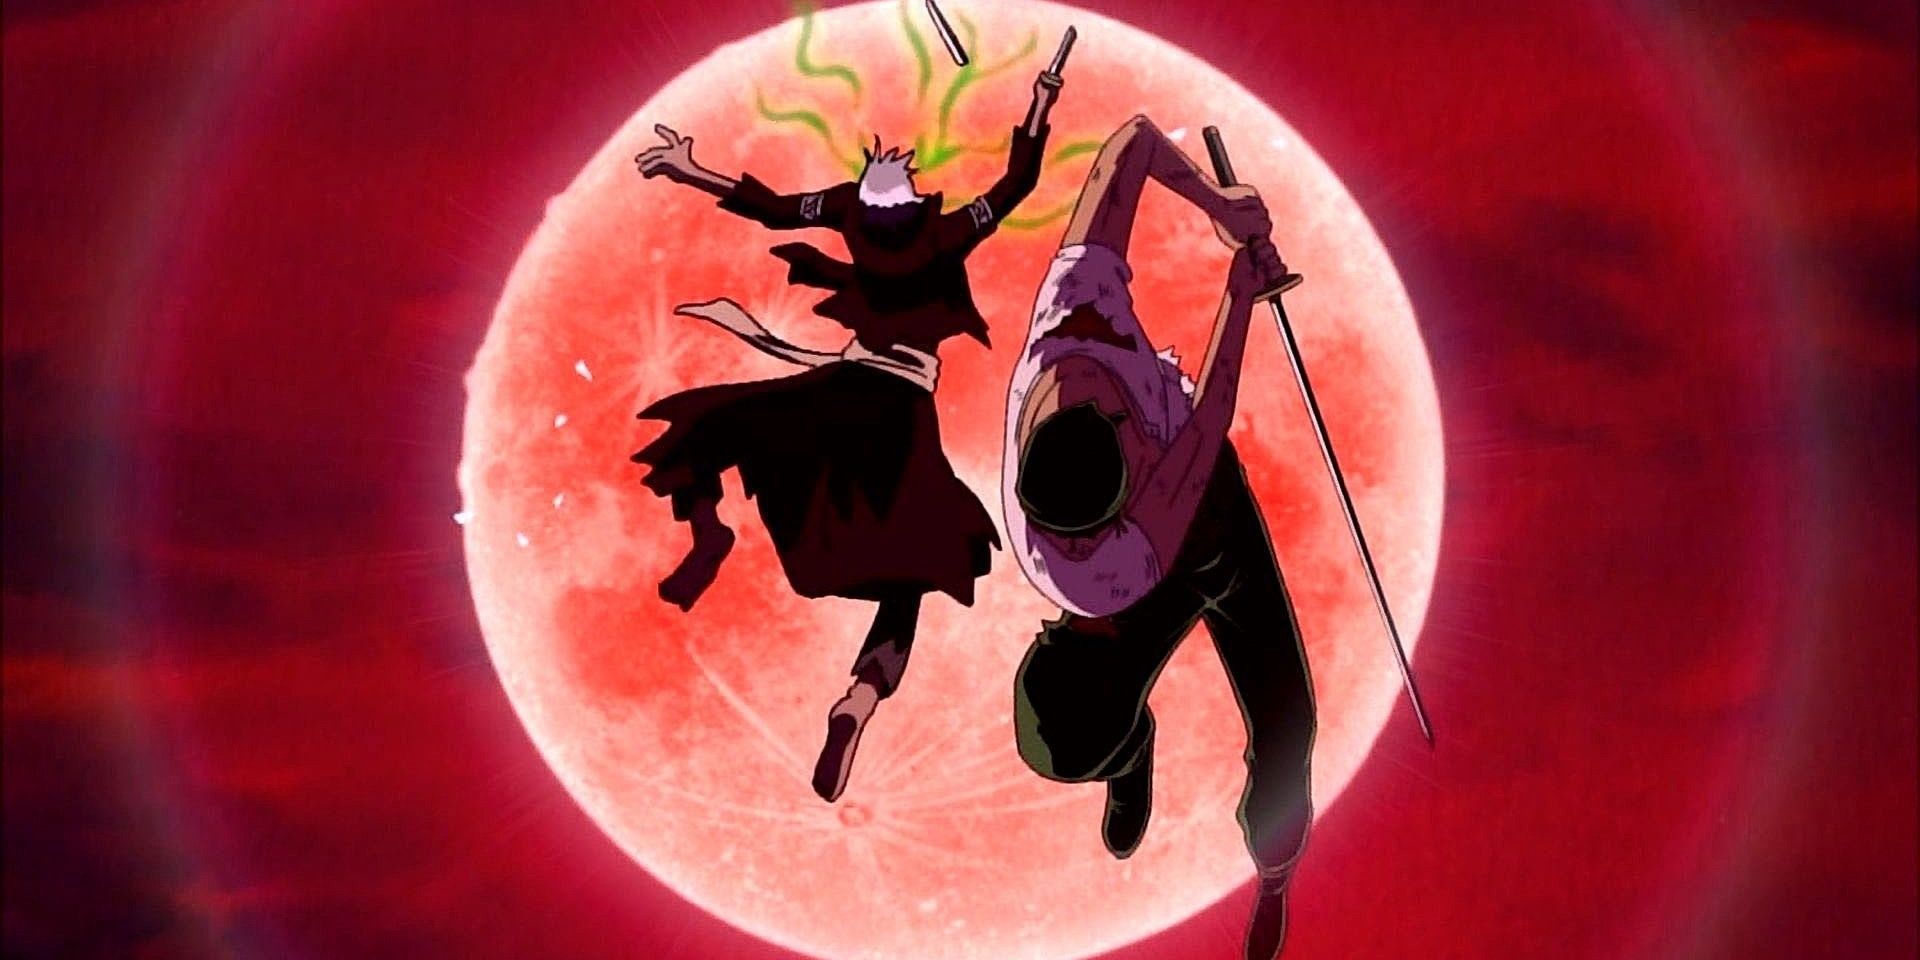 Zoro striking down an opponent in The Cursed Holy Sword